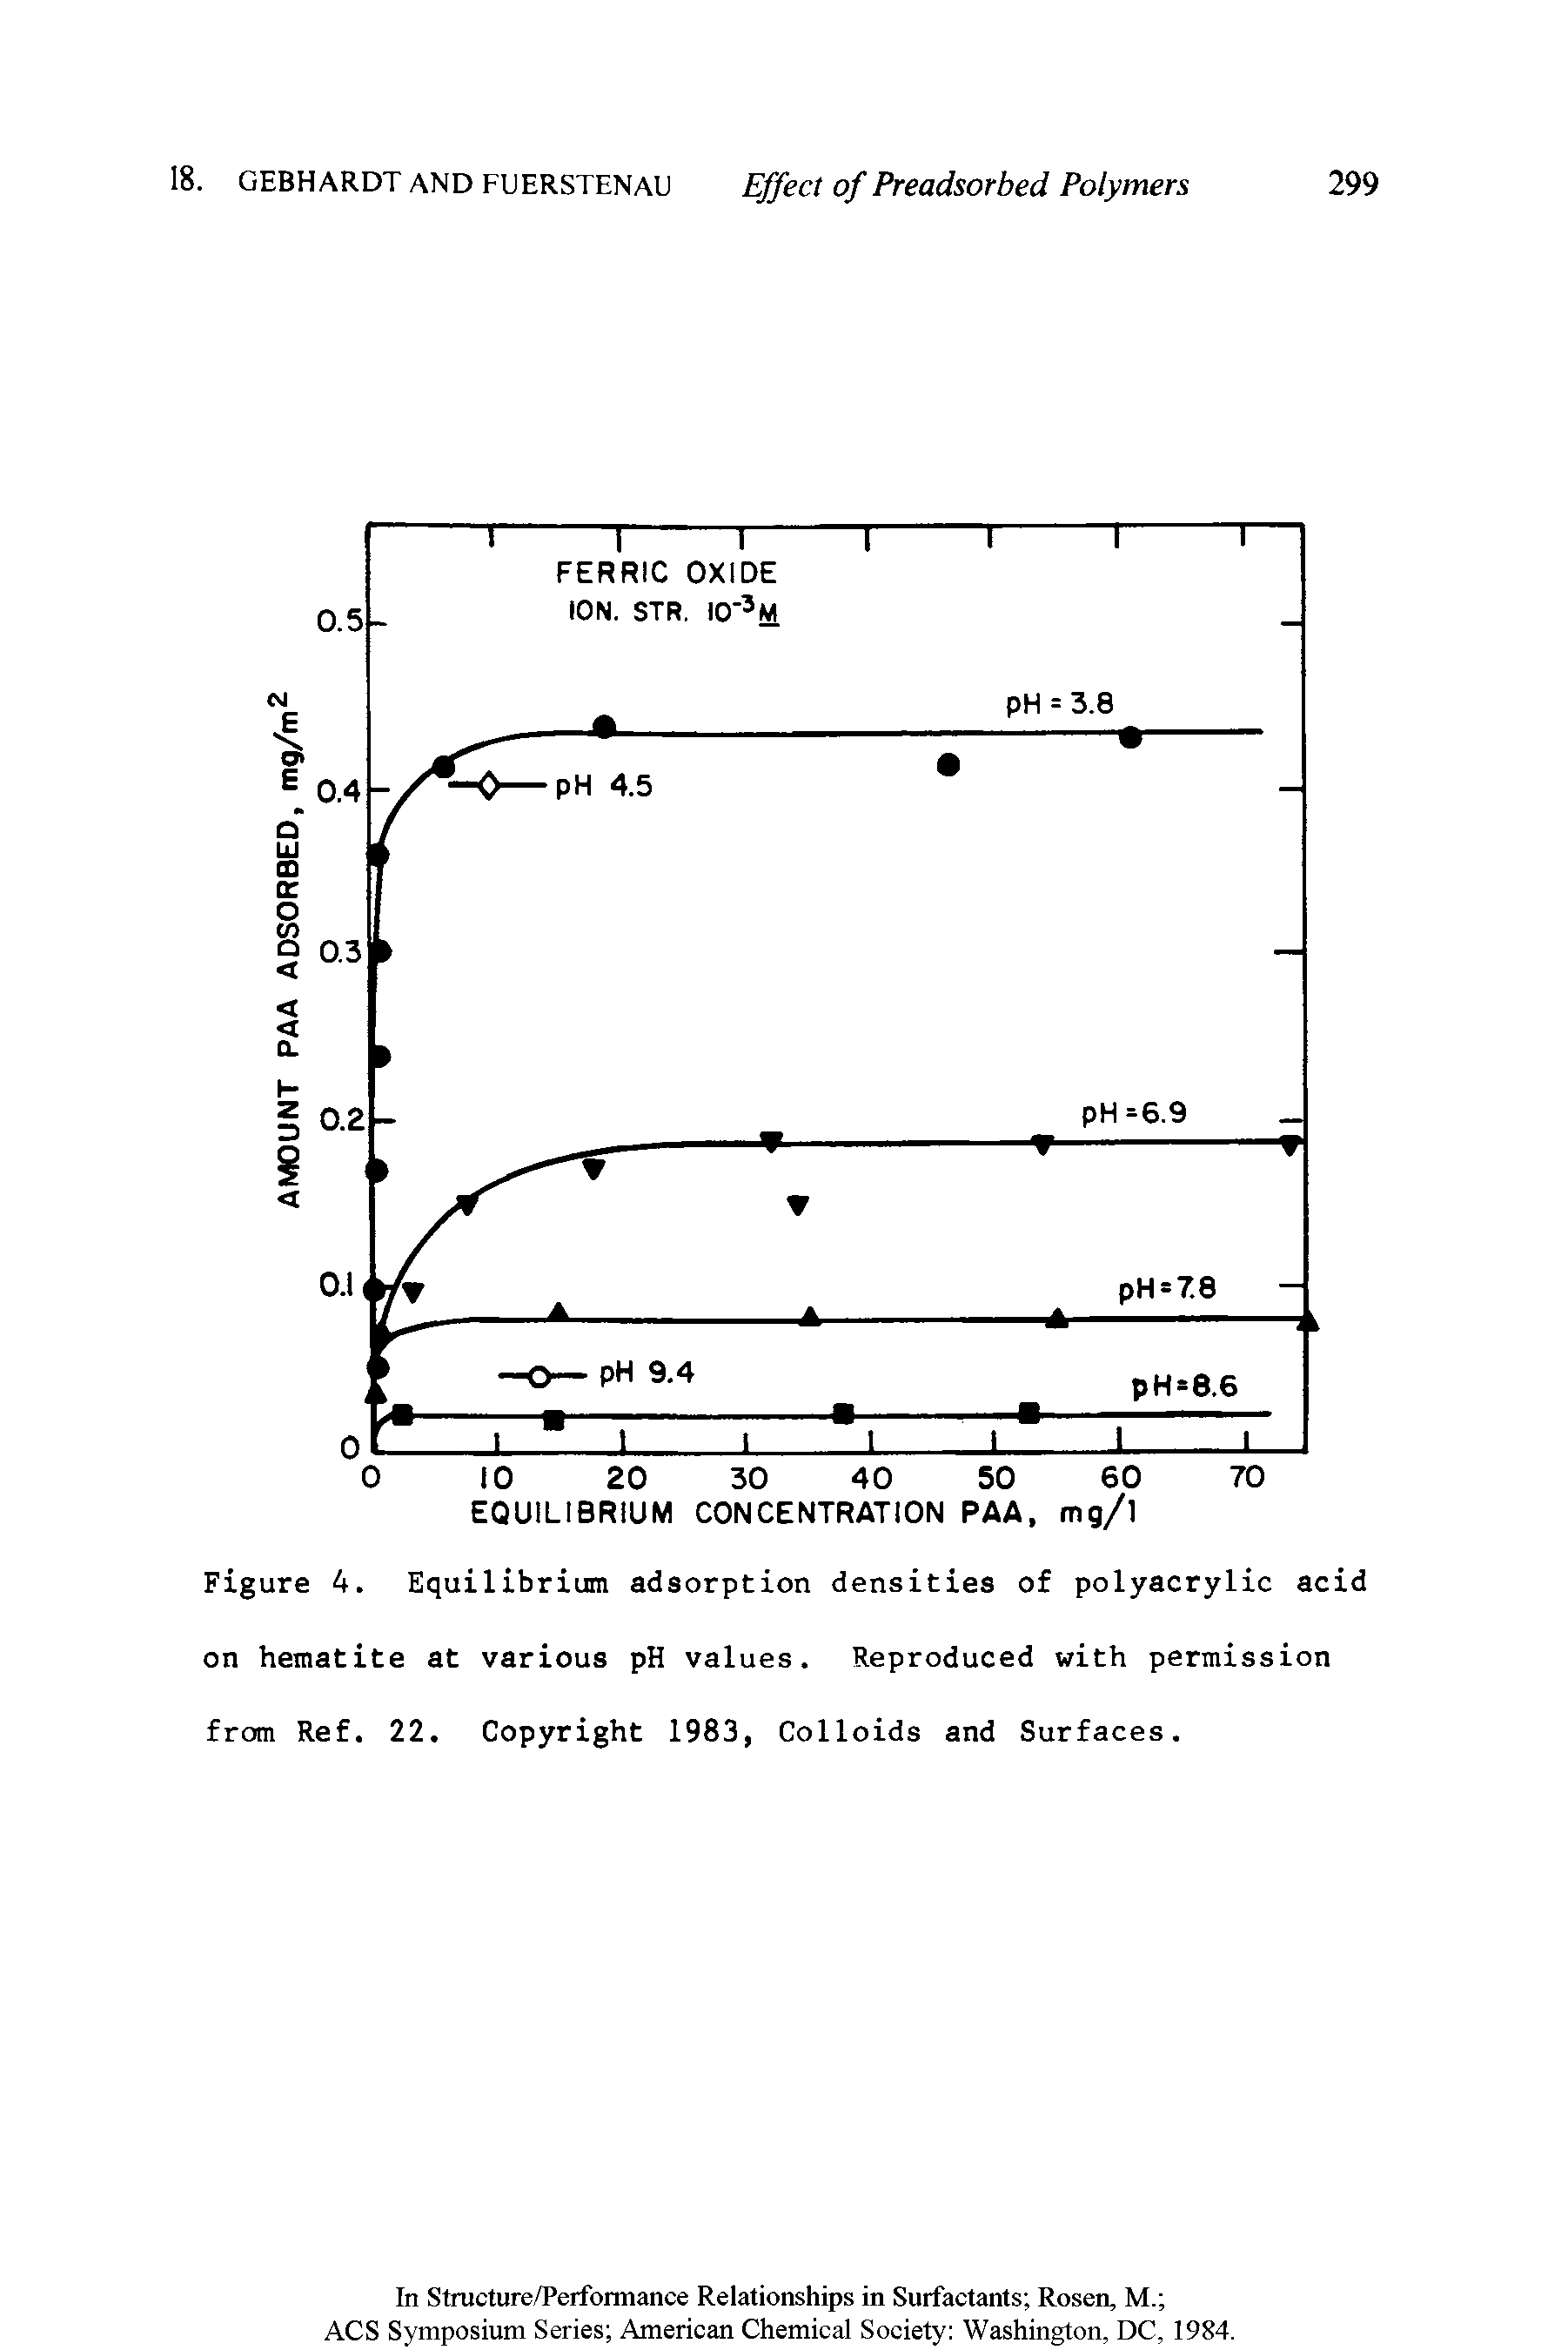 Figure 4. Equilibrium adsorption densities of polyacrylic acid on hematite at various pH values. Reproduced with permission from Ref. 22. Copyright 1983, Colloids and Surfaces.